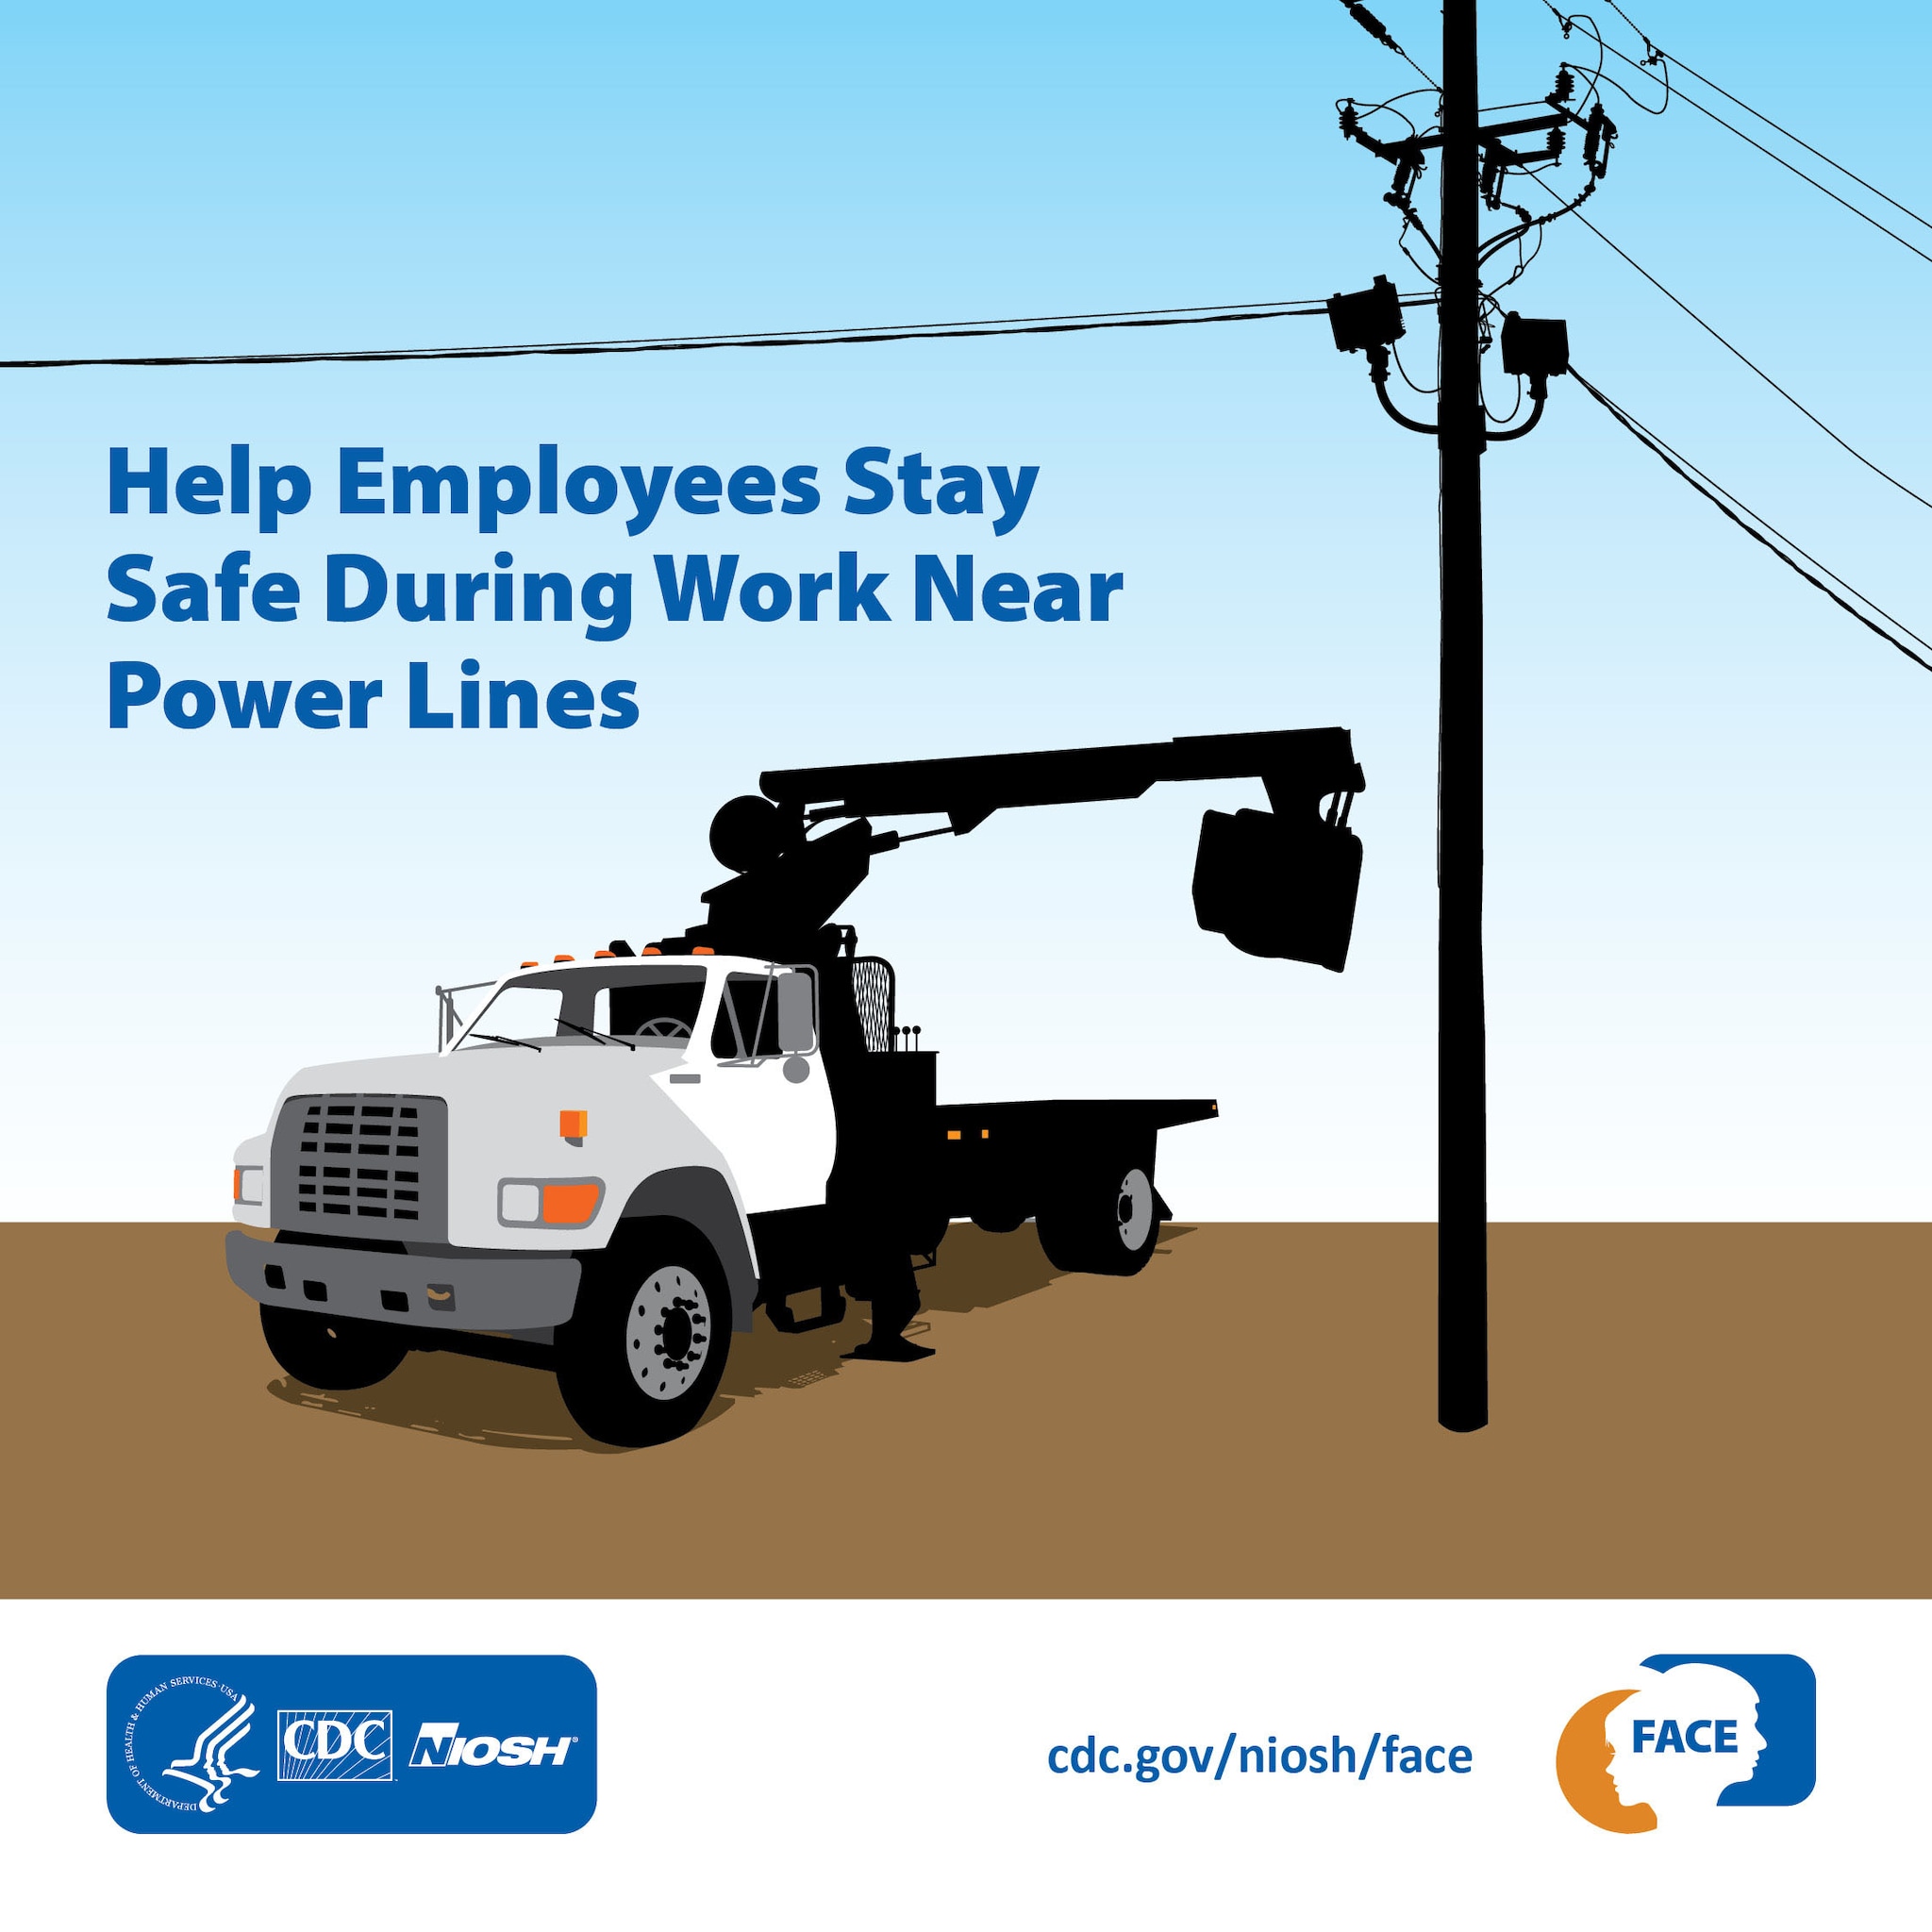 Help Employees Stay Safe During Work Near Power Lines